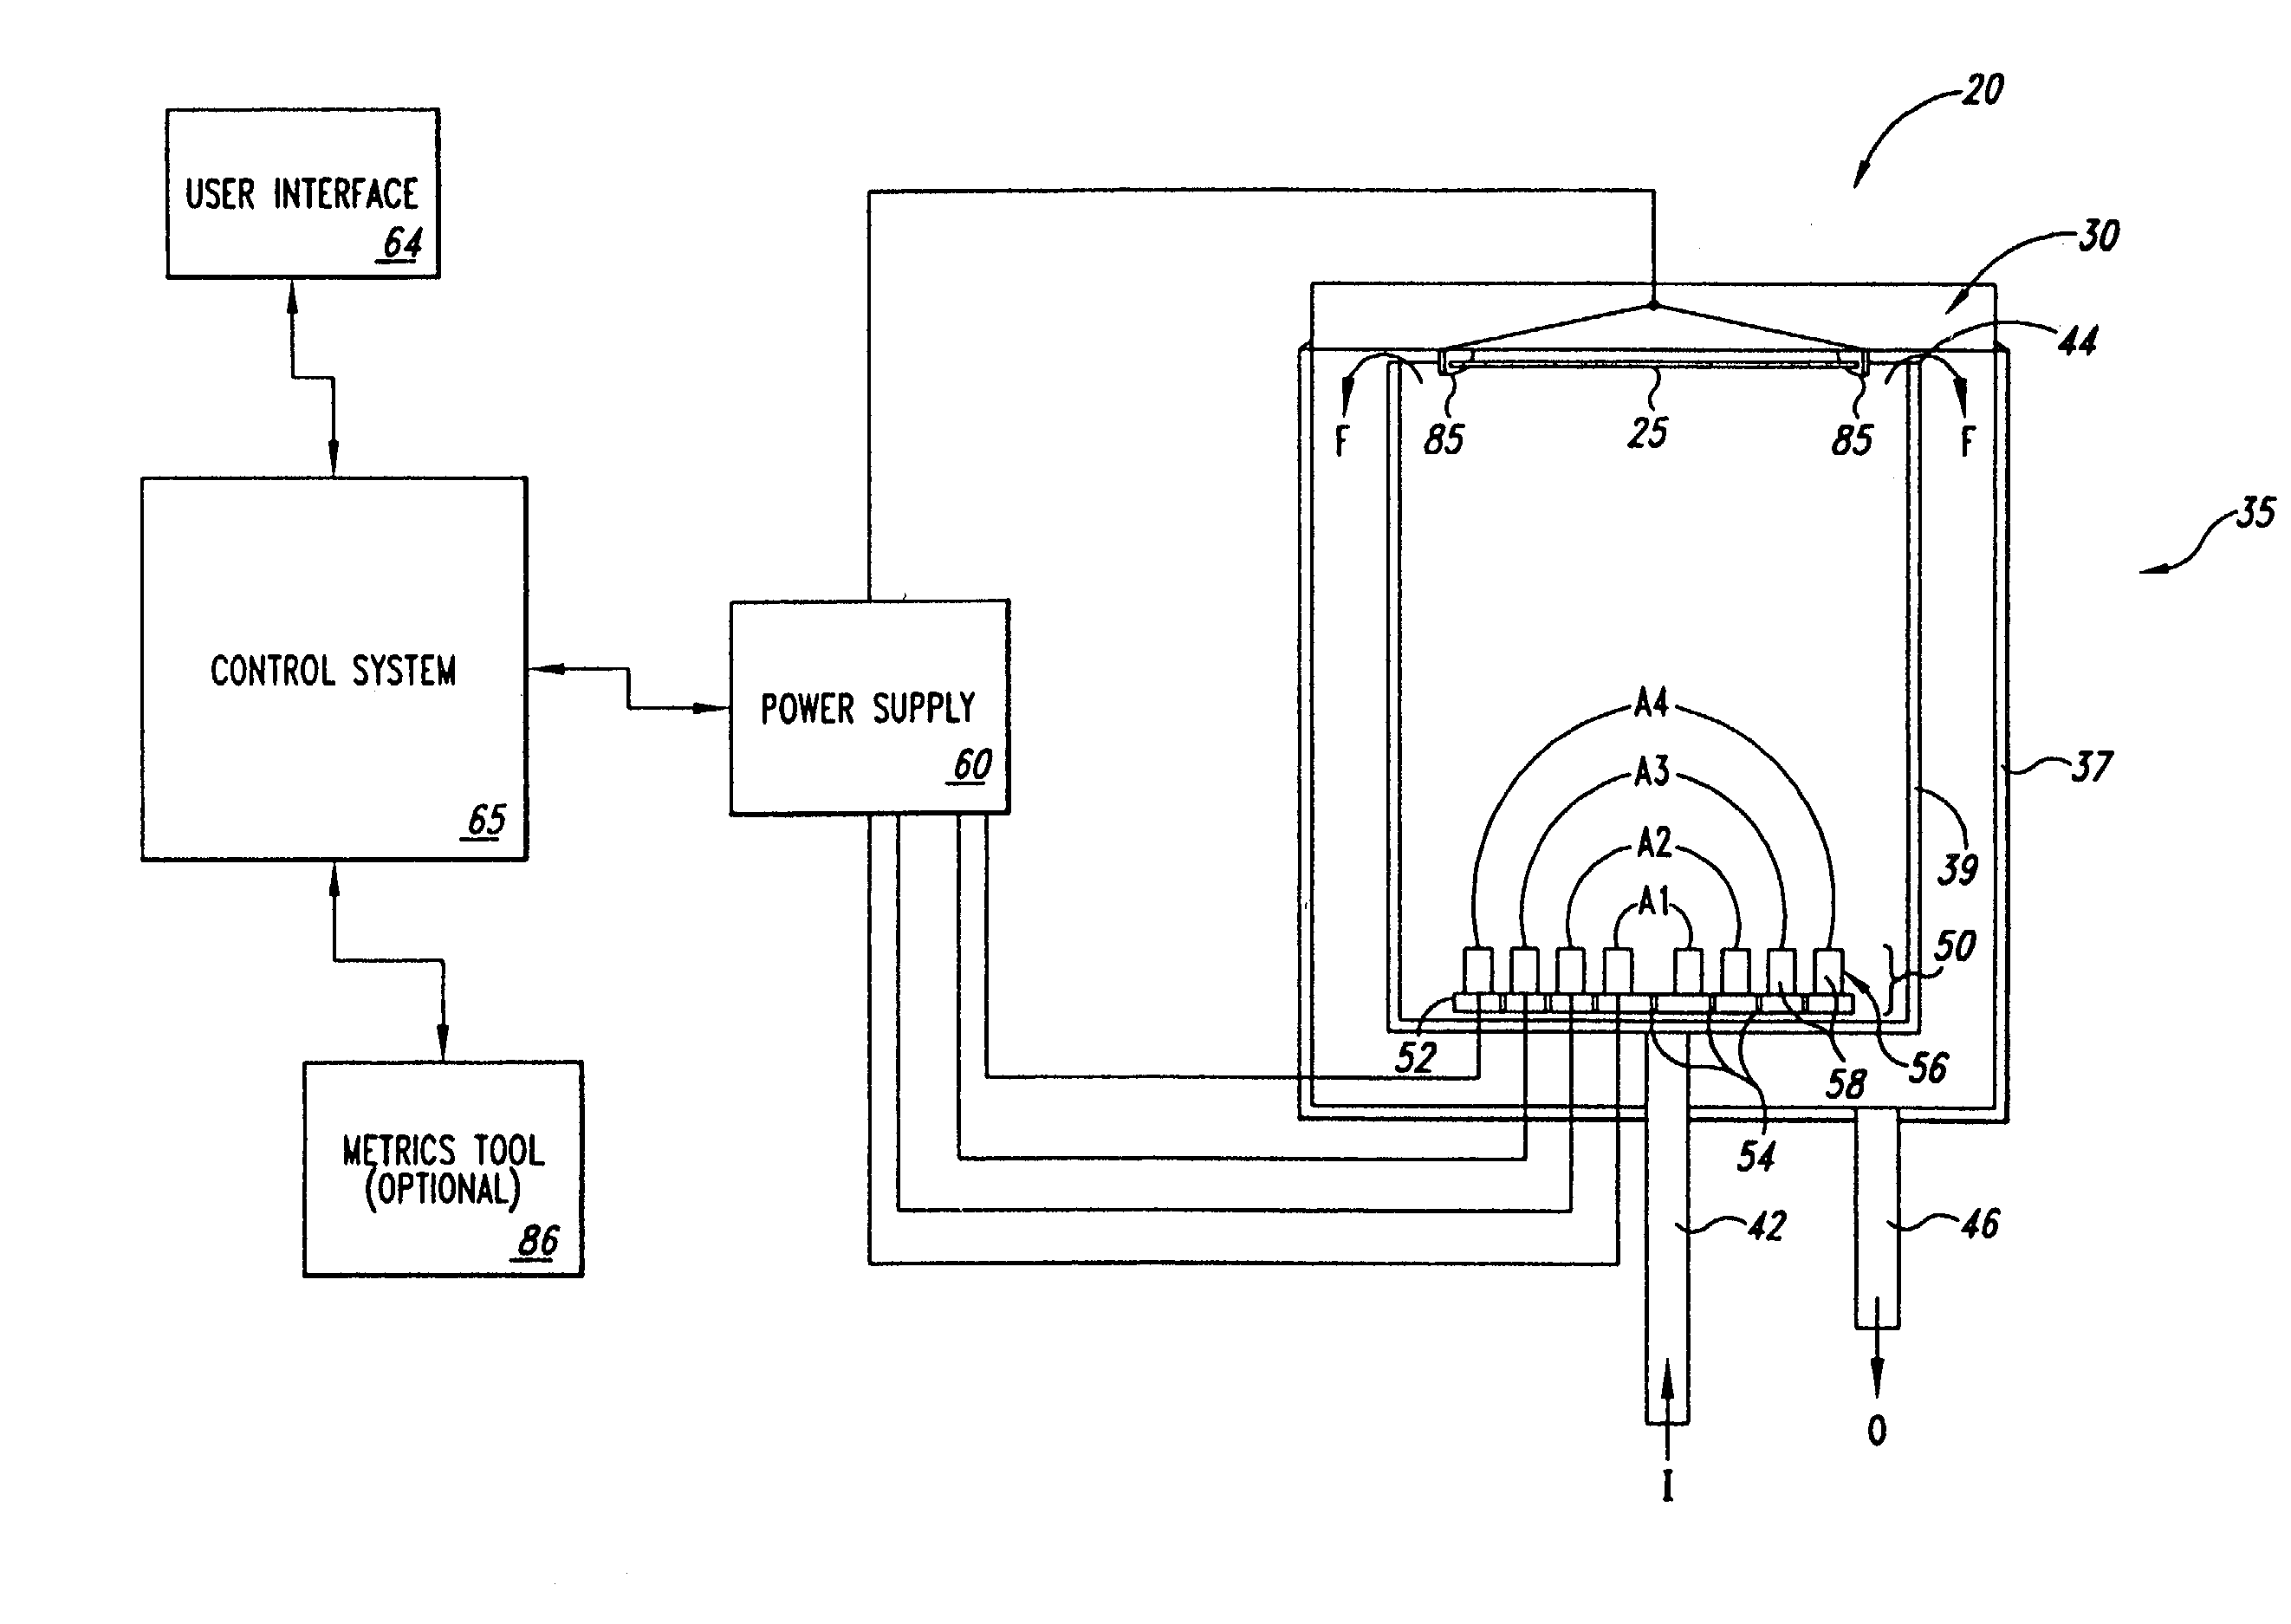 Tuning electrodes used in a reactor for electrochemically processing a microelectronic workpiece